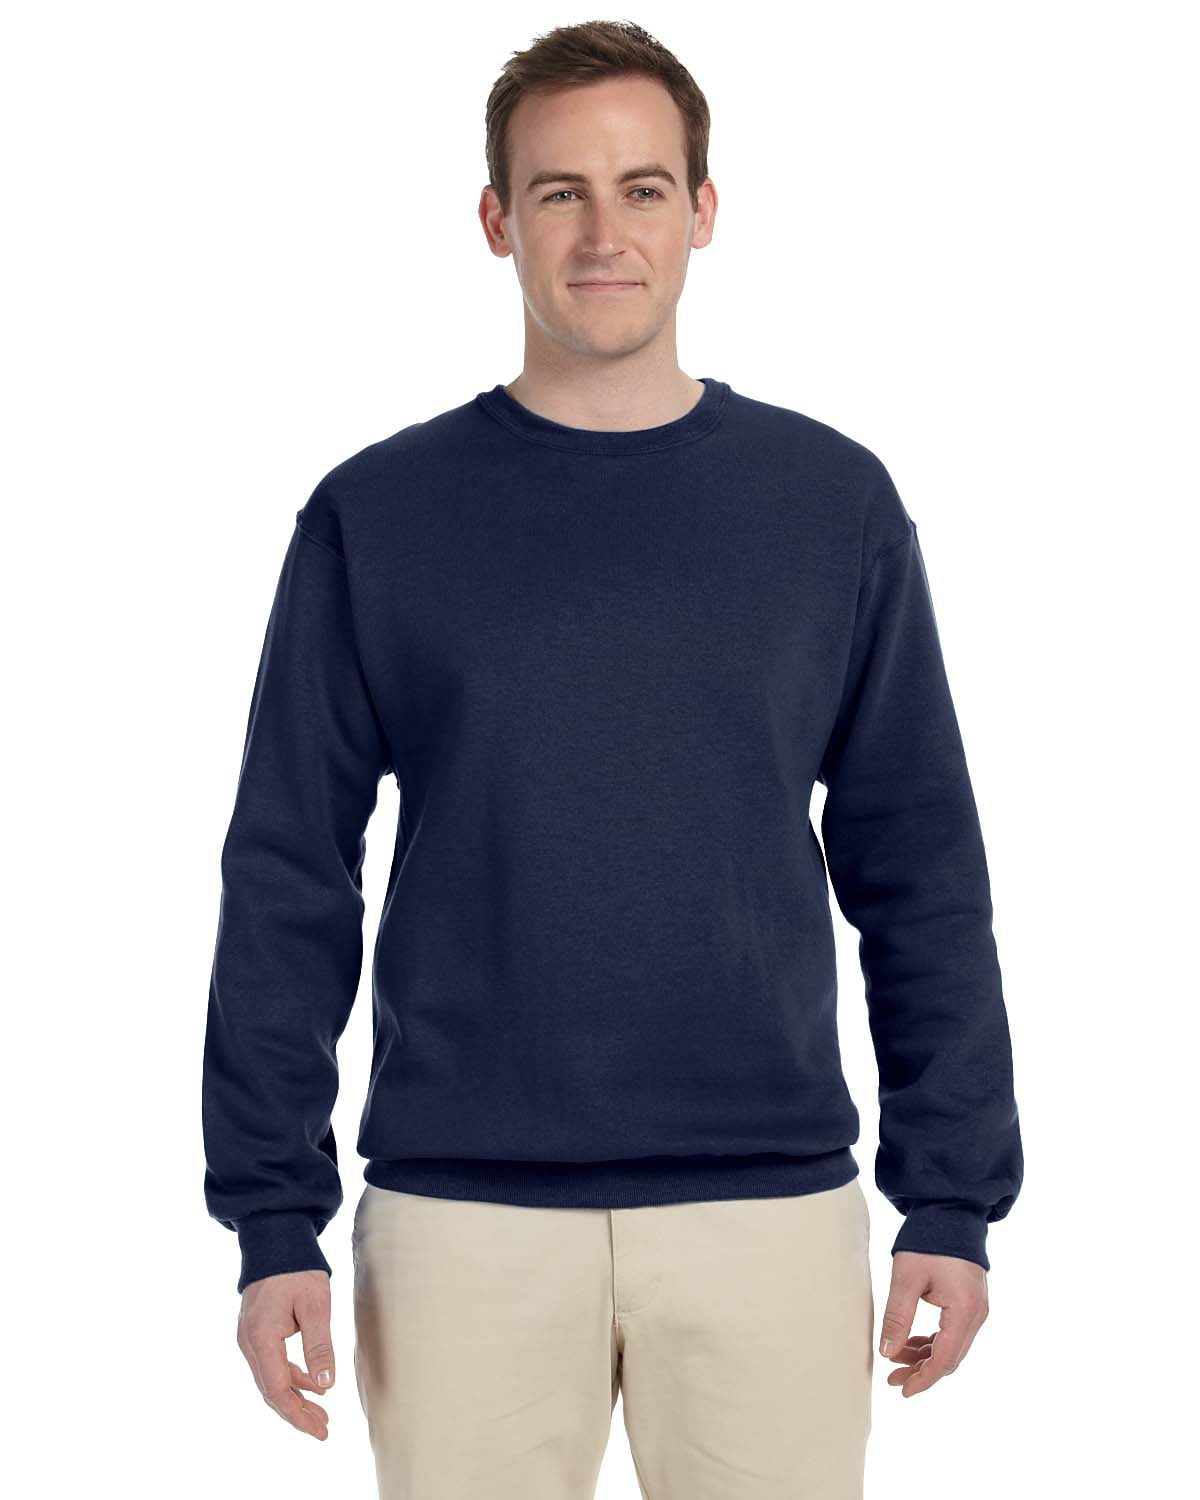 Fruit of the Loom - Fruit of the Loom Adult 12 oz. Supercotton&trade; Fleece Crew - 82300